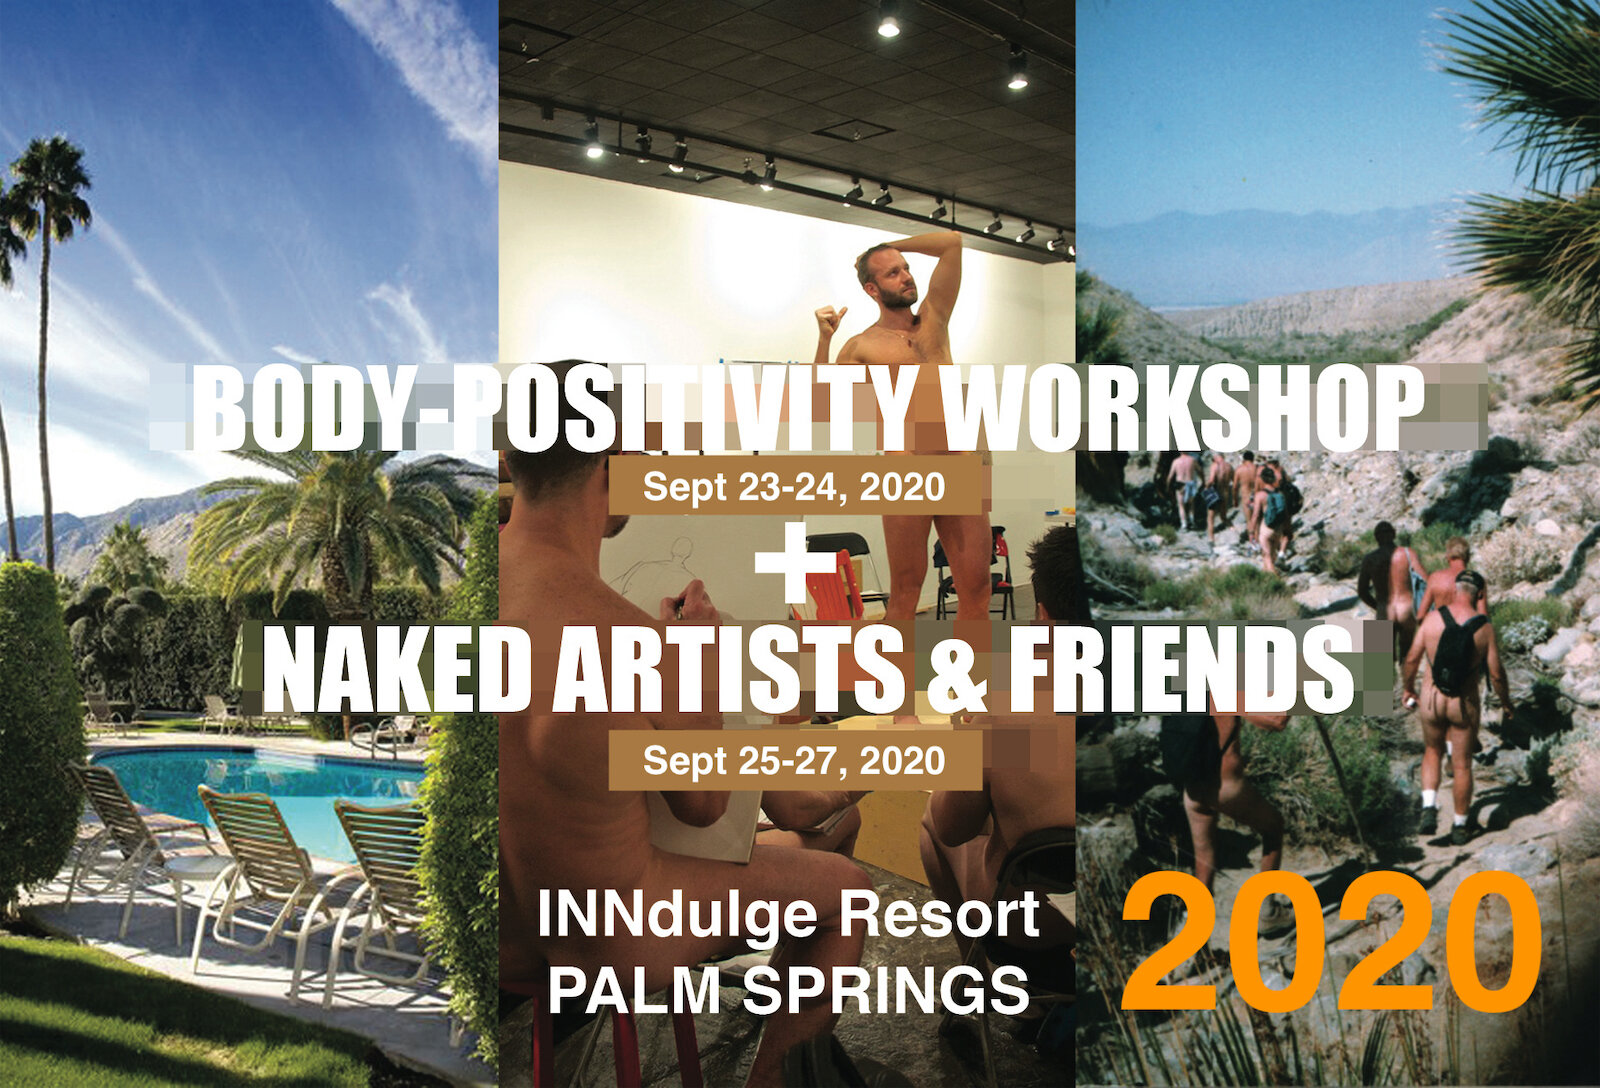 Registration for our PALM SPRINGS retreat is open now! Limited Early-Bird tickets available. Click image for info. (Copy)